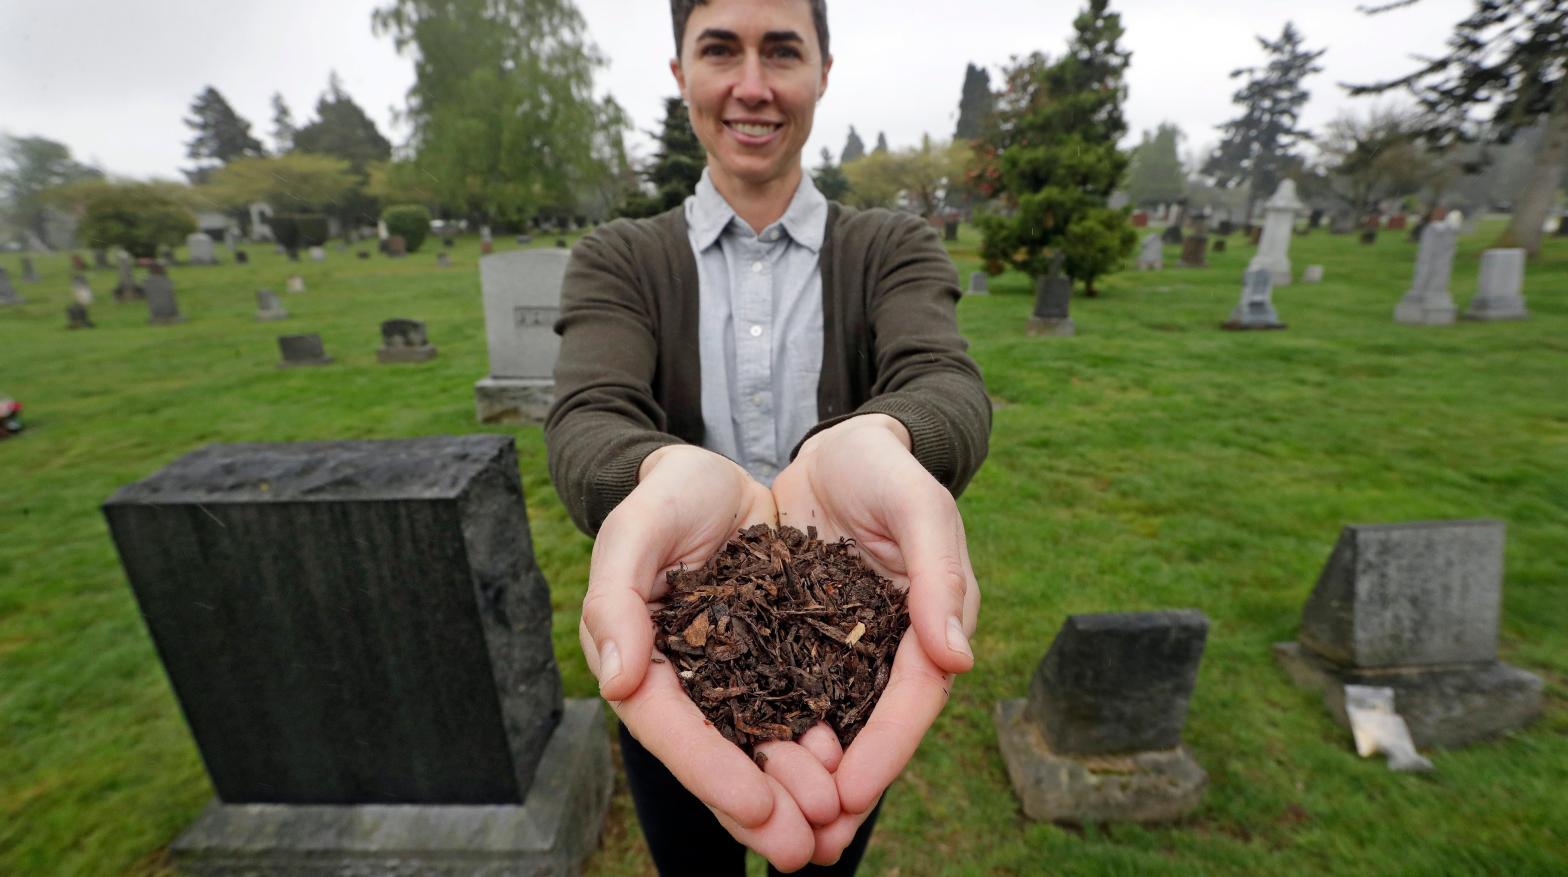 Katrina Spade, the CEO of Recompose, poses with mulch made from a dead cow in 2019. (Photo: Elaine Thompson, AP)